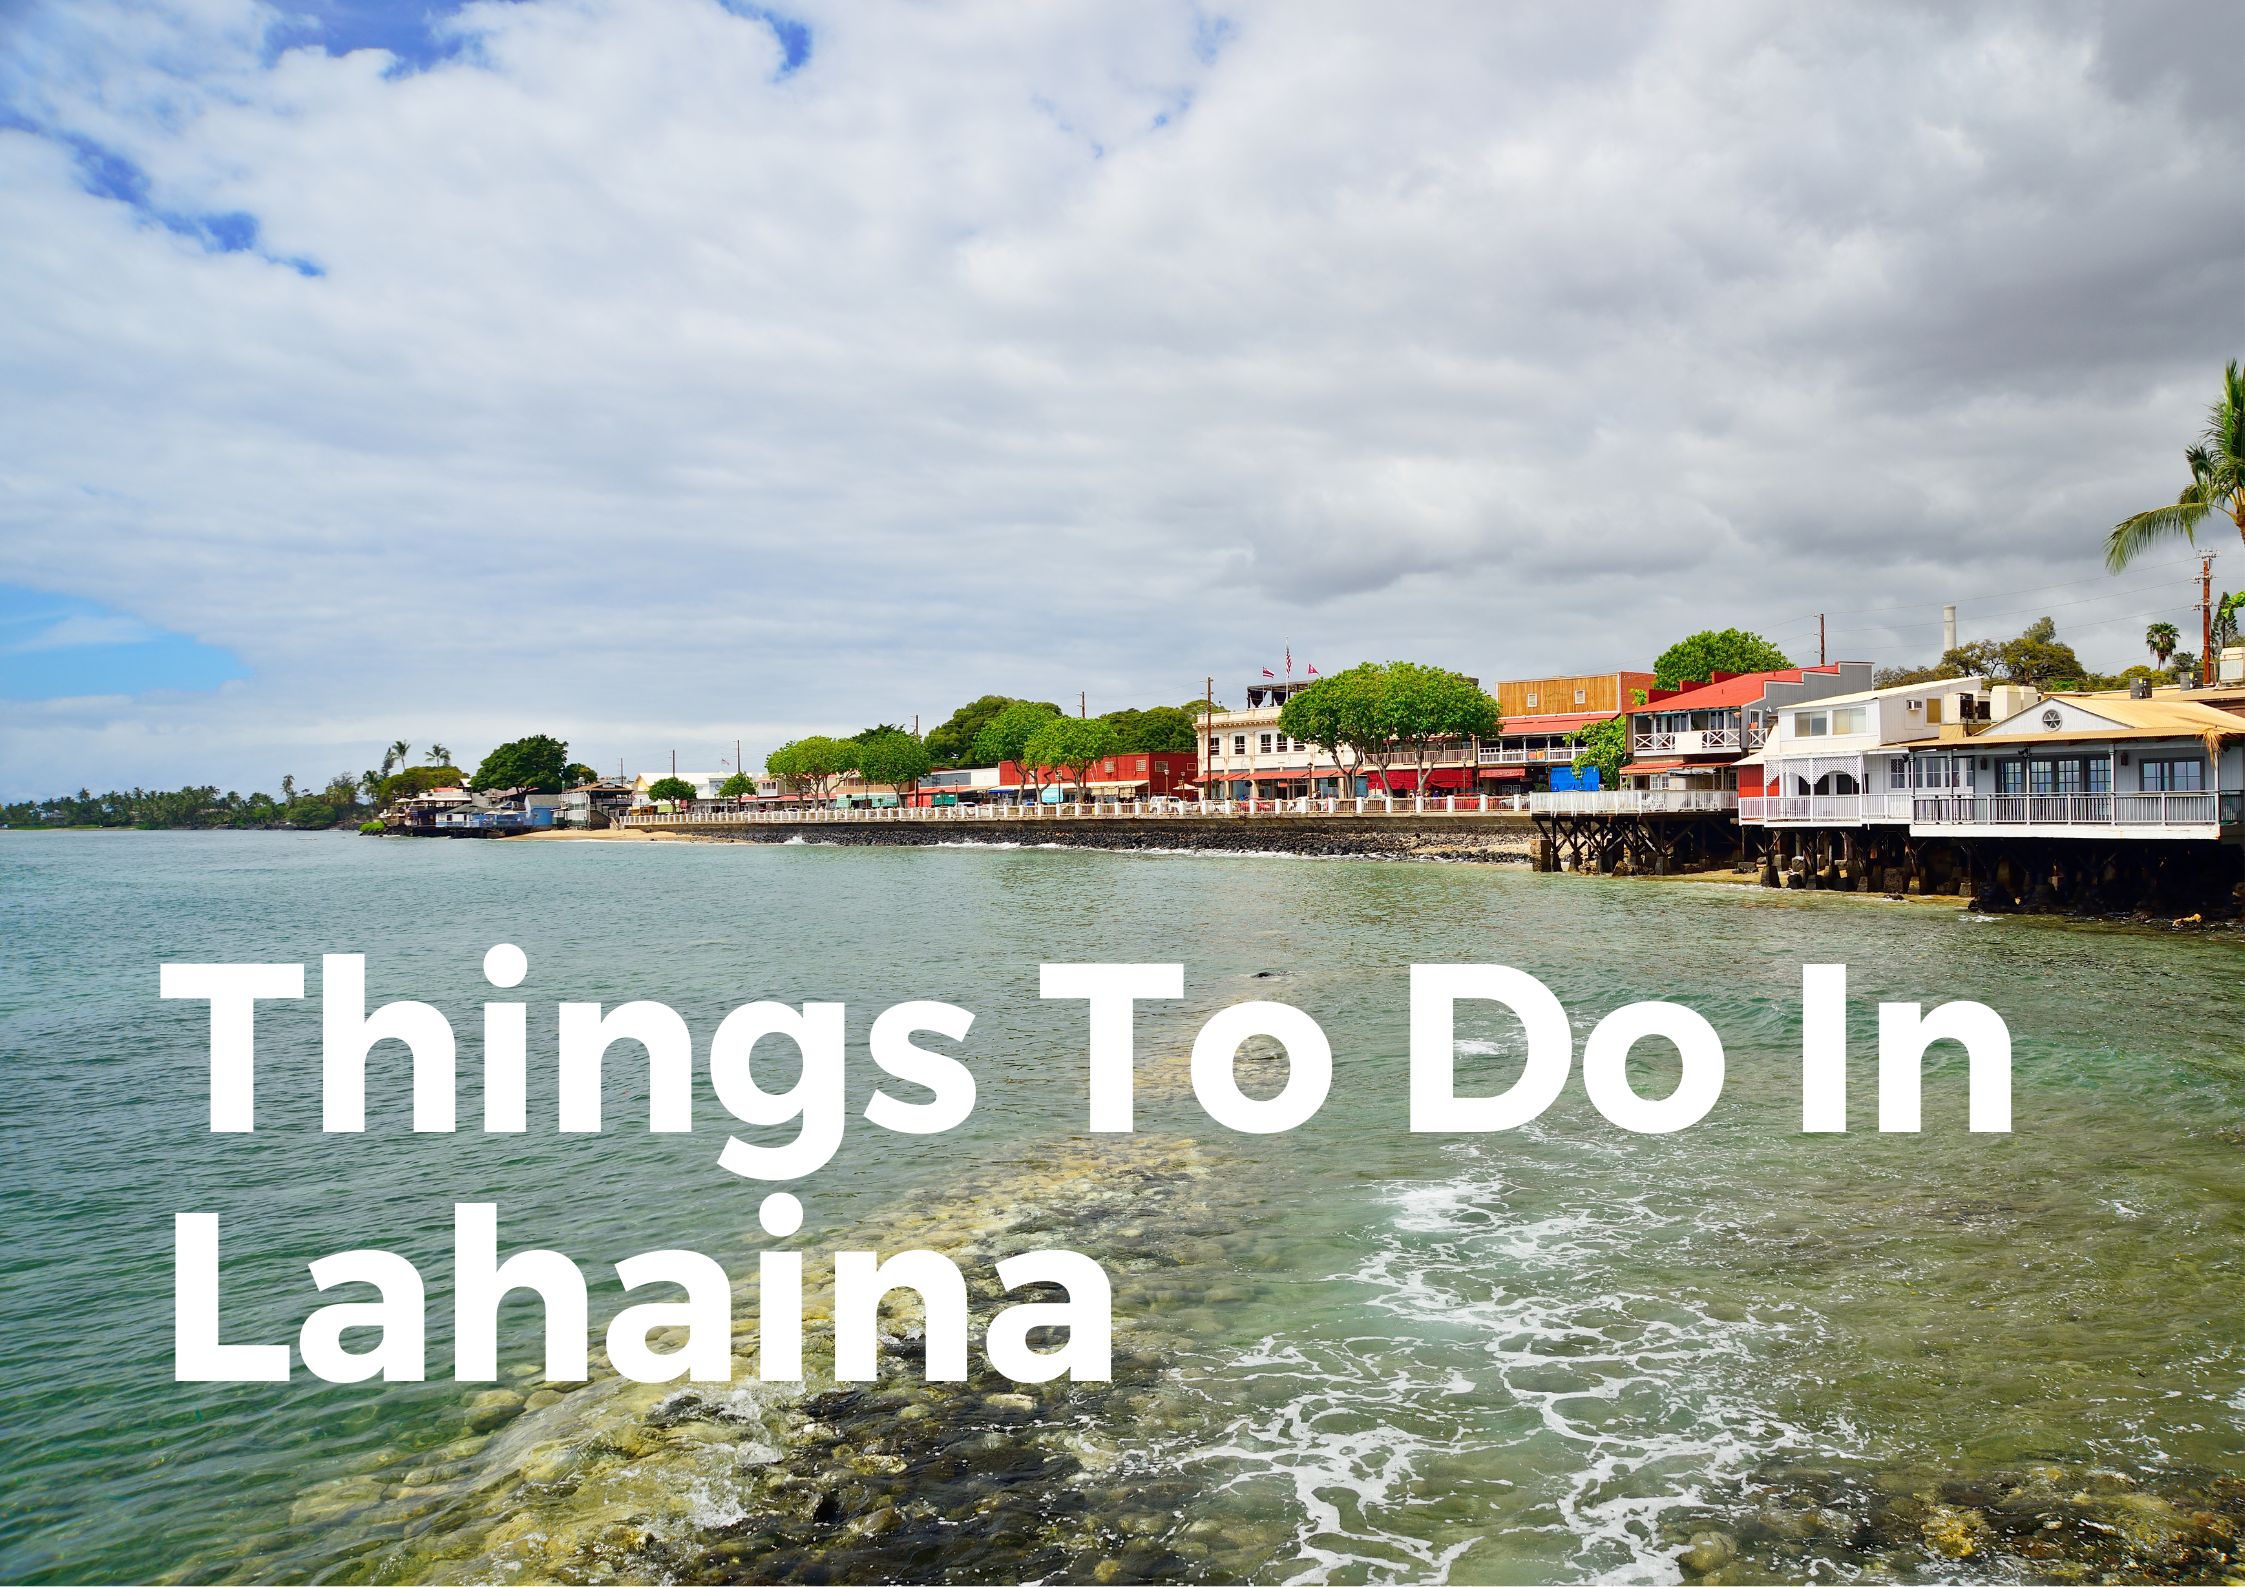 Things to do in Lahaina